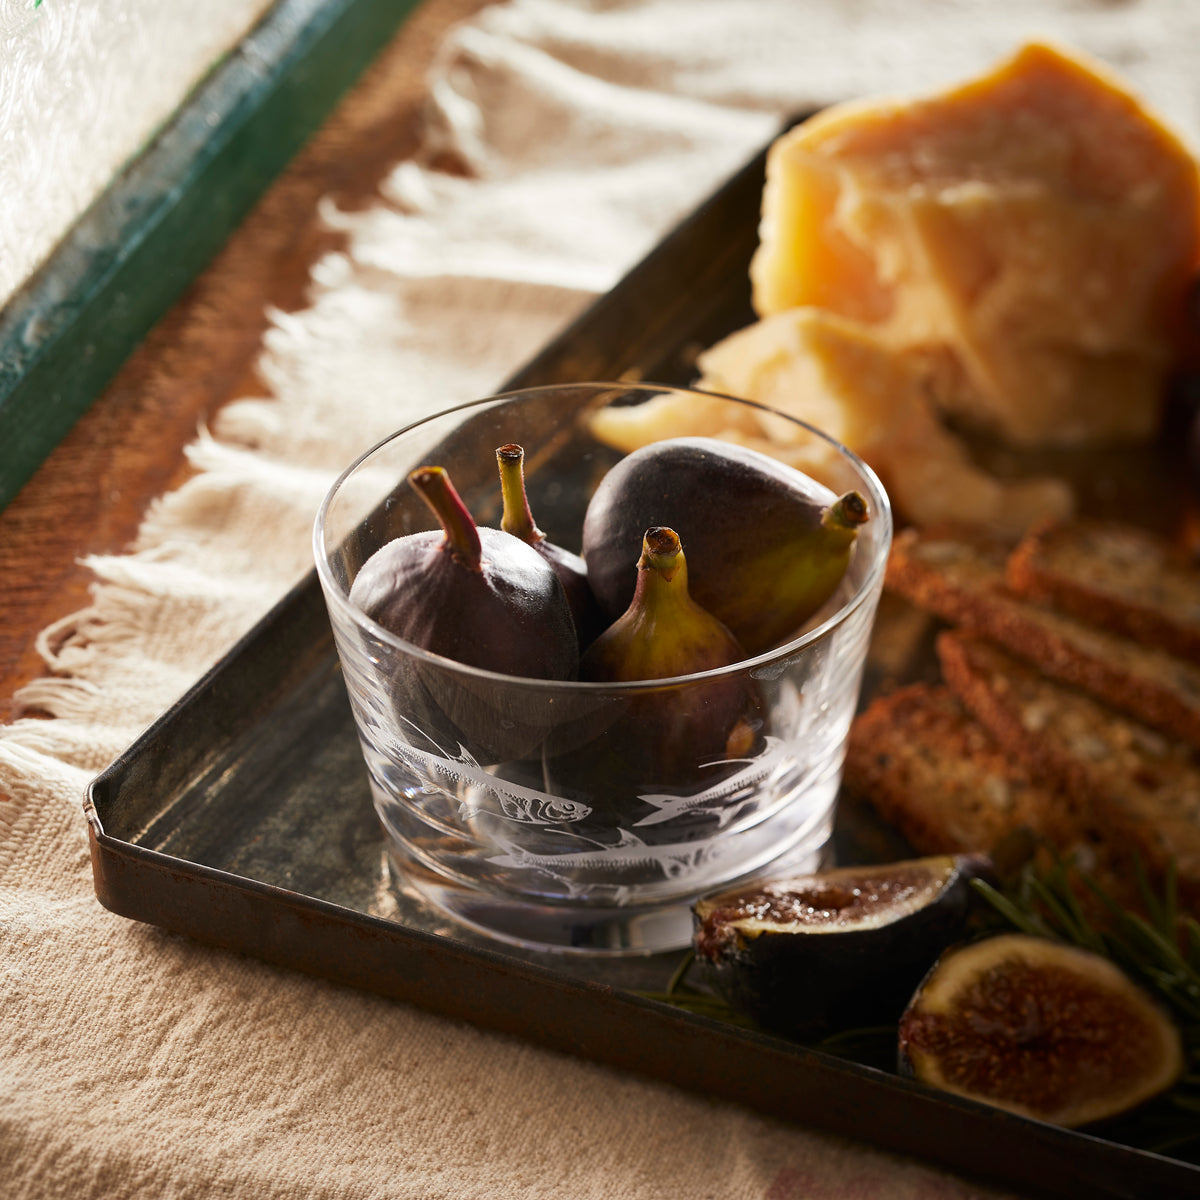 A clear glass bowl containing figs is on a metal tray with cheese, bread, and herbs, all placed on a beige cloth surface. This elegant setup perfectly complements the Caskata Lake House Bundle decor, adding a touch of rustic charm.